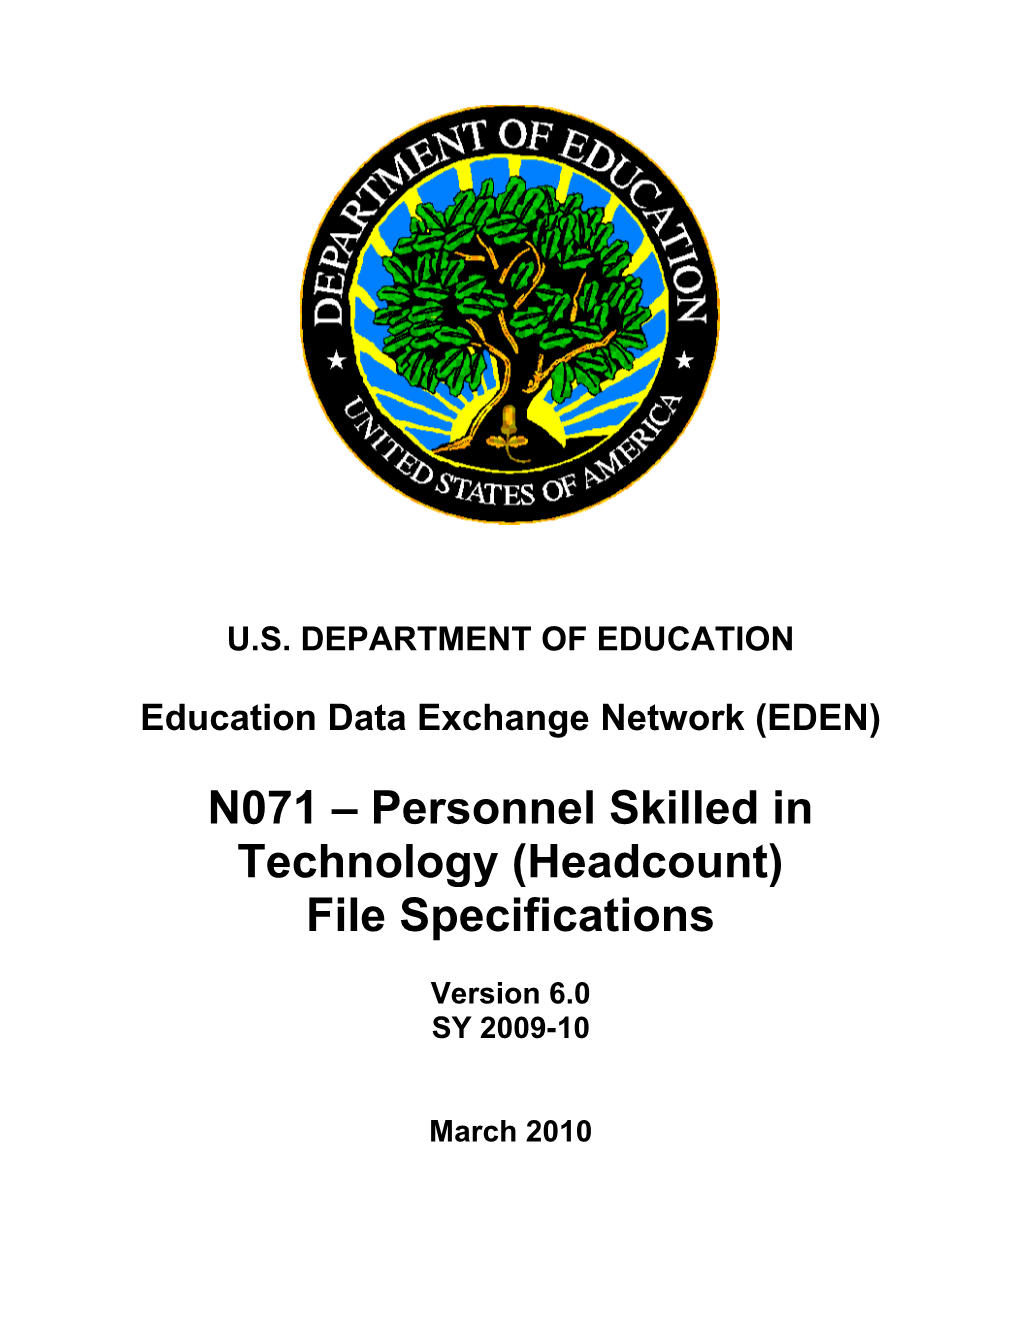 Personnel Skilled in Technology (Headcount) File Specifications